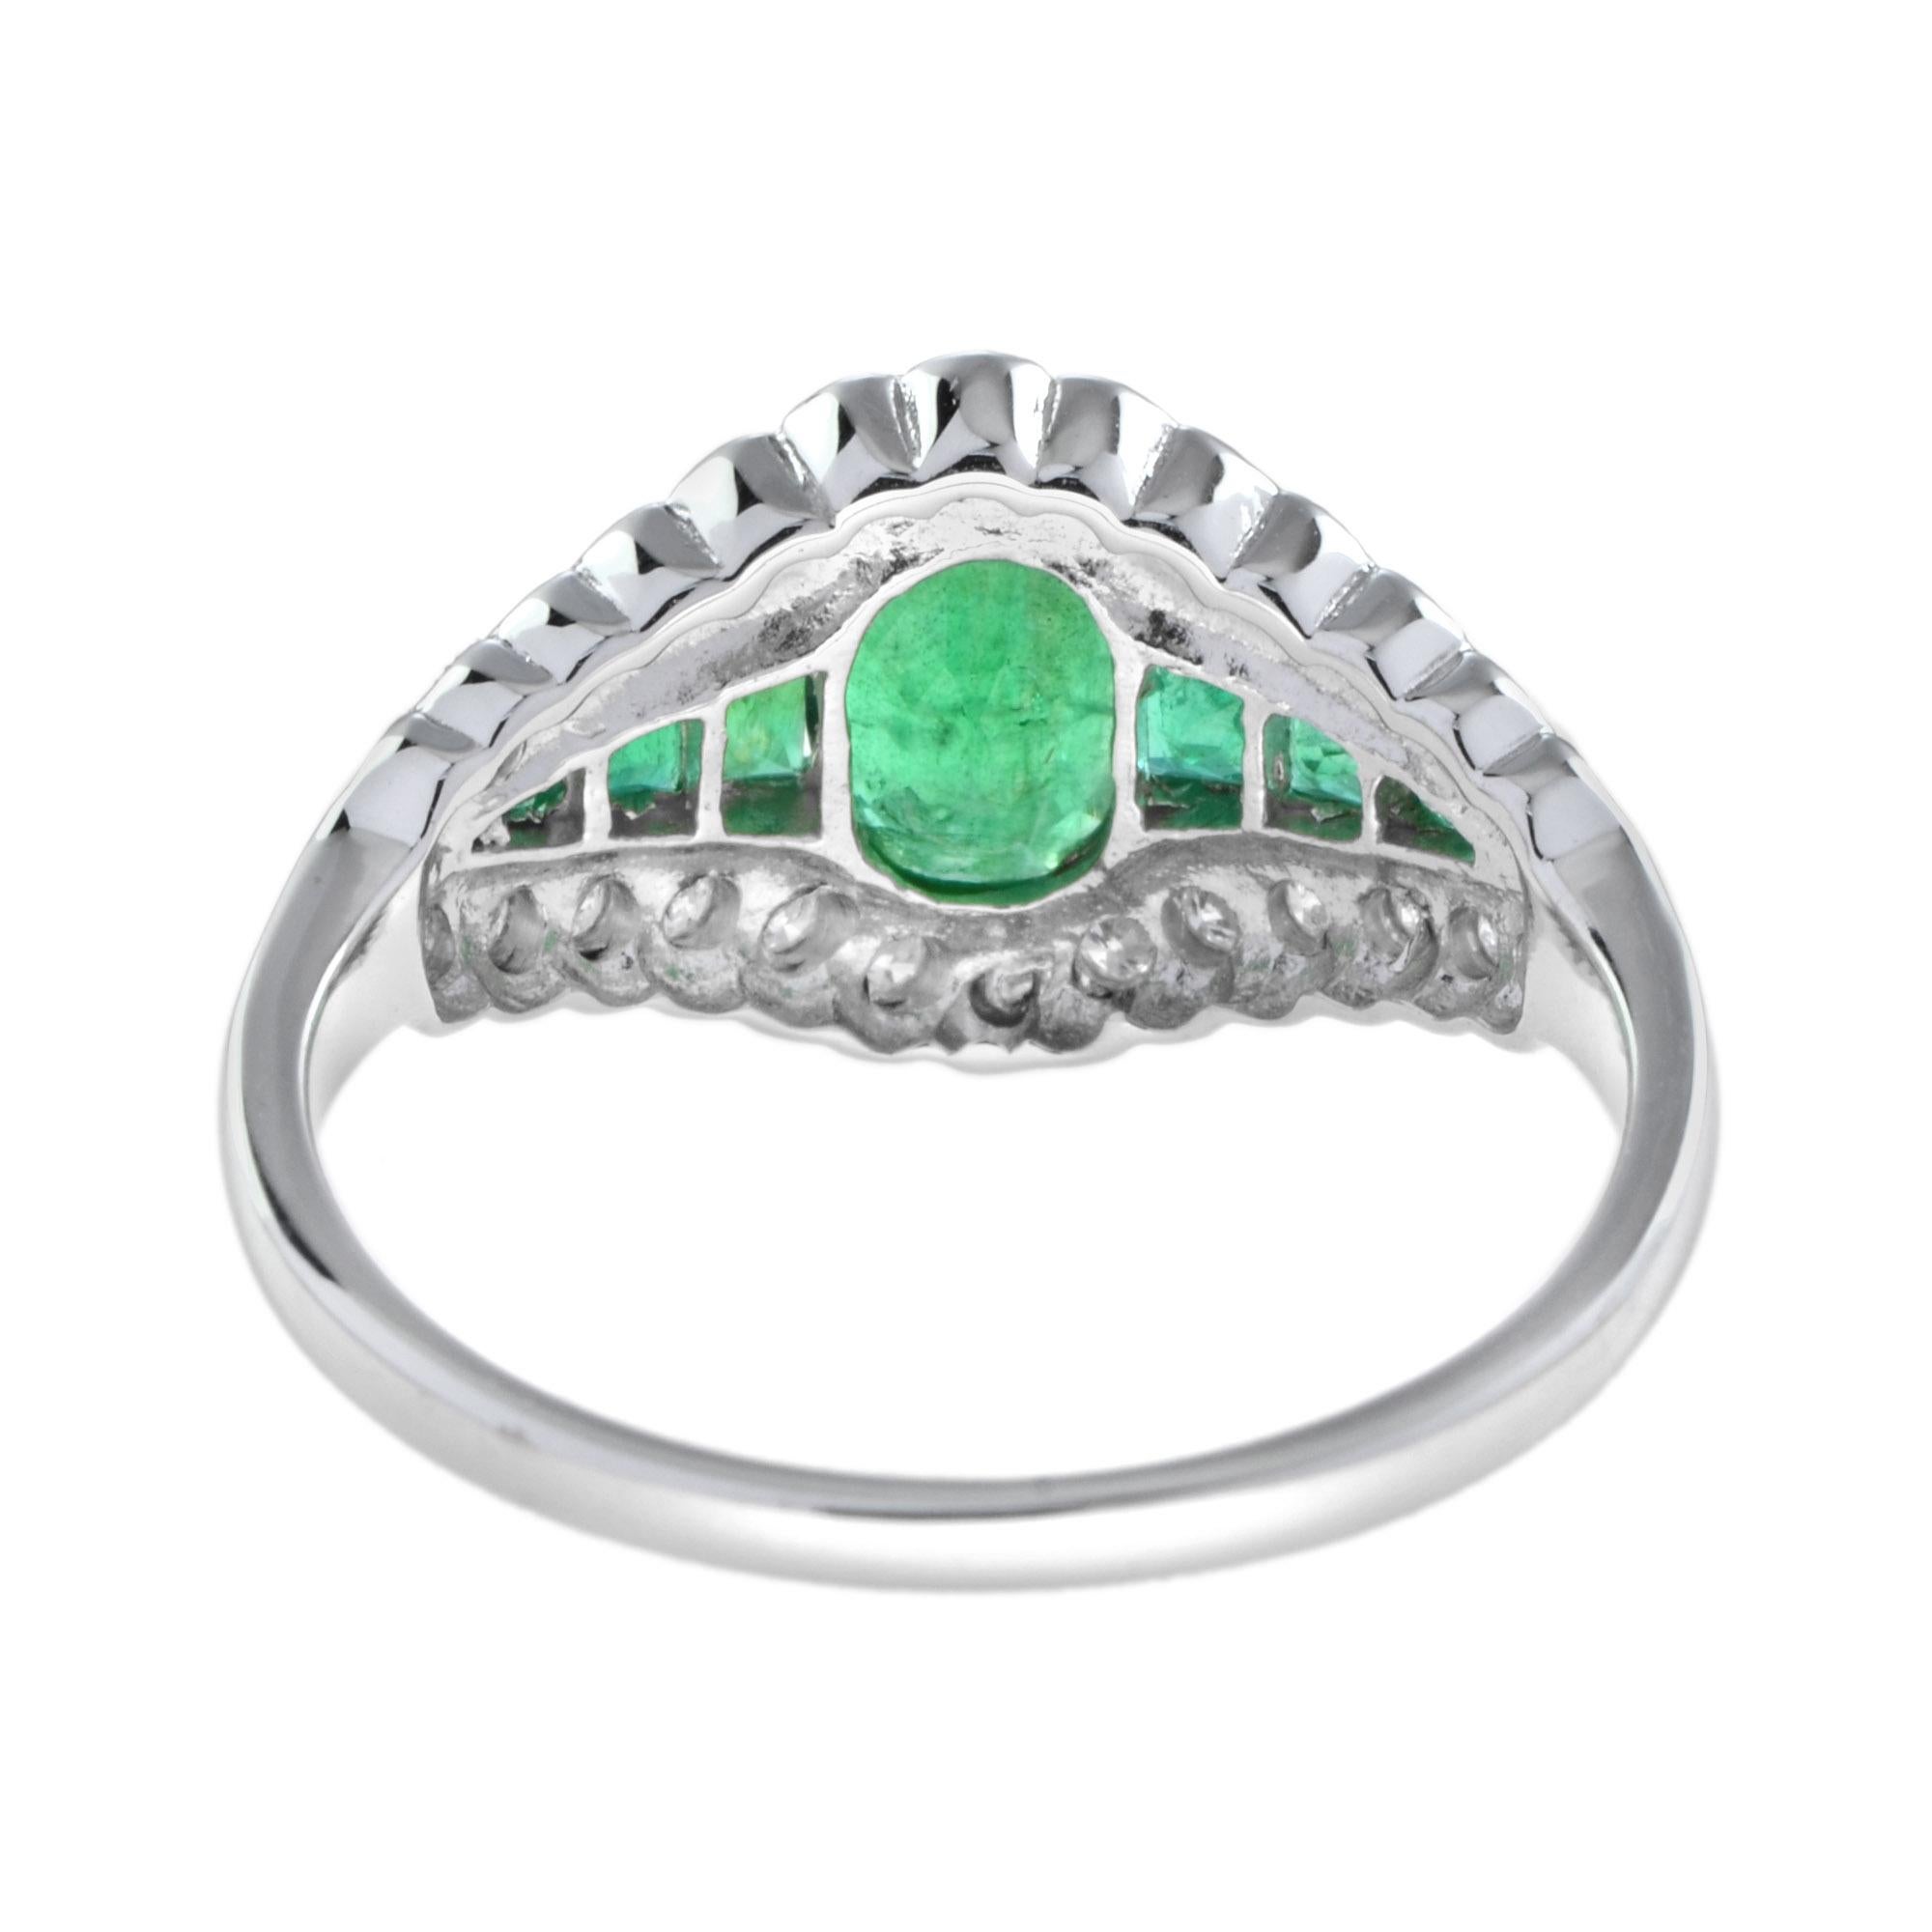 For Sale:  Catherine Lace Natural Emerald and Diamond Art Deco Style Halo Ring in 18K Gold 4